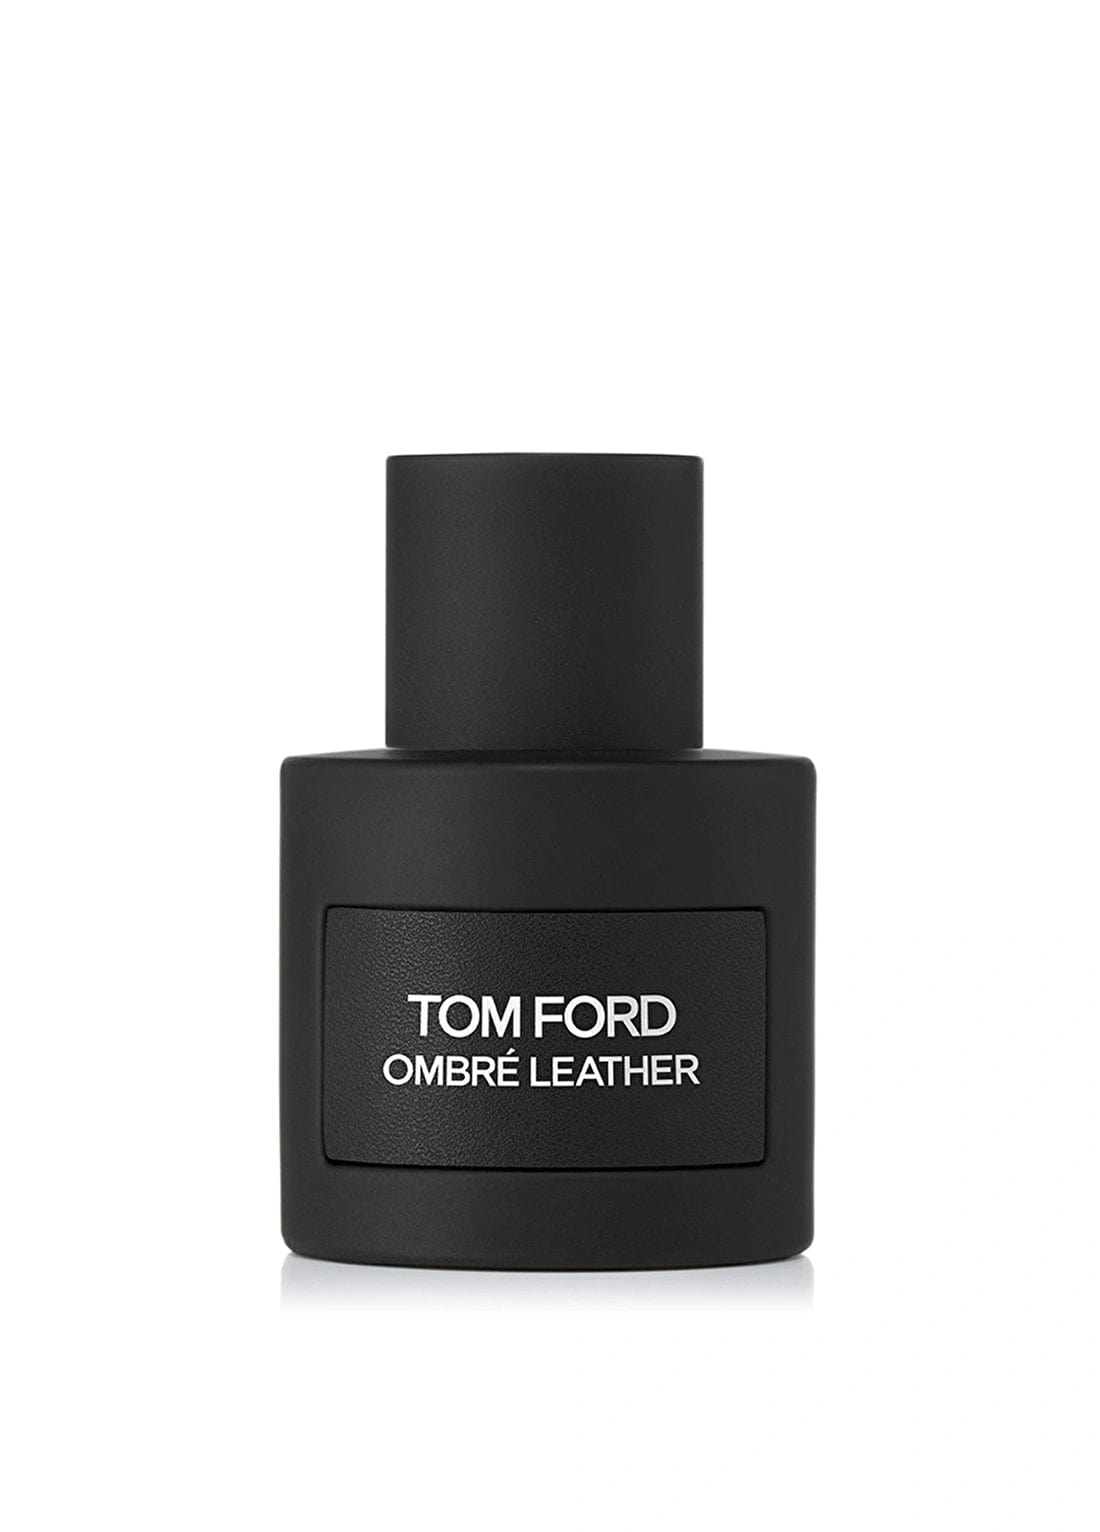 Tom Ford Ombre Leather Edp Tom Ford